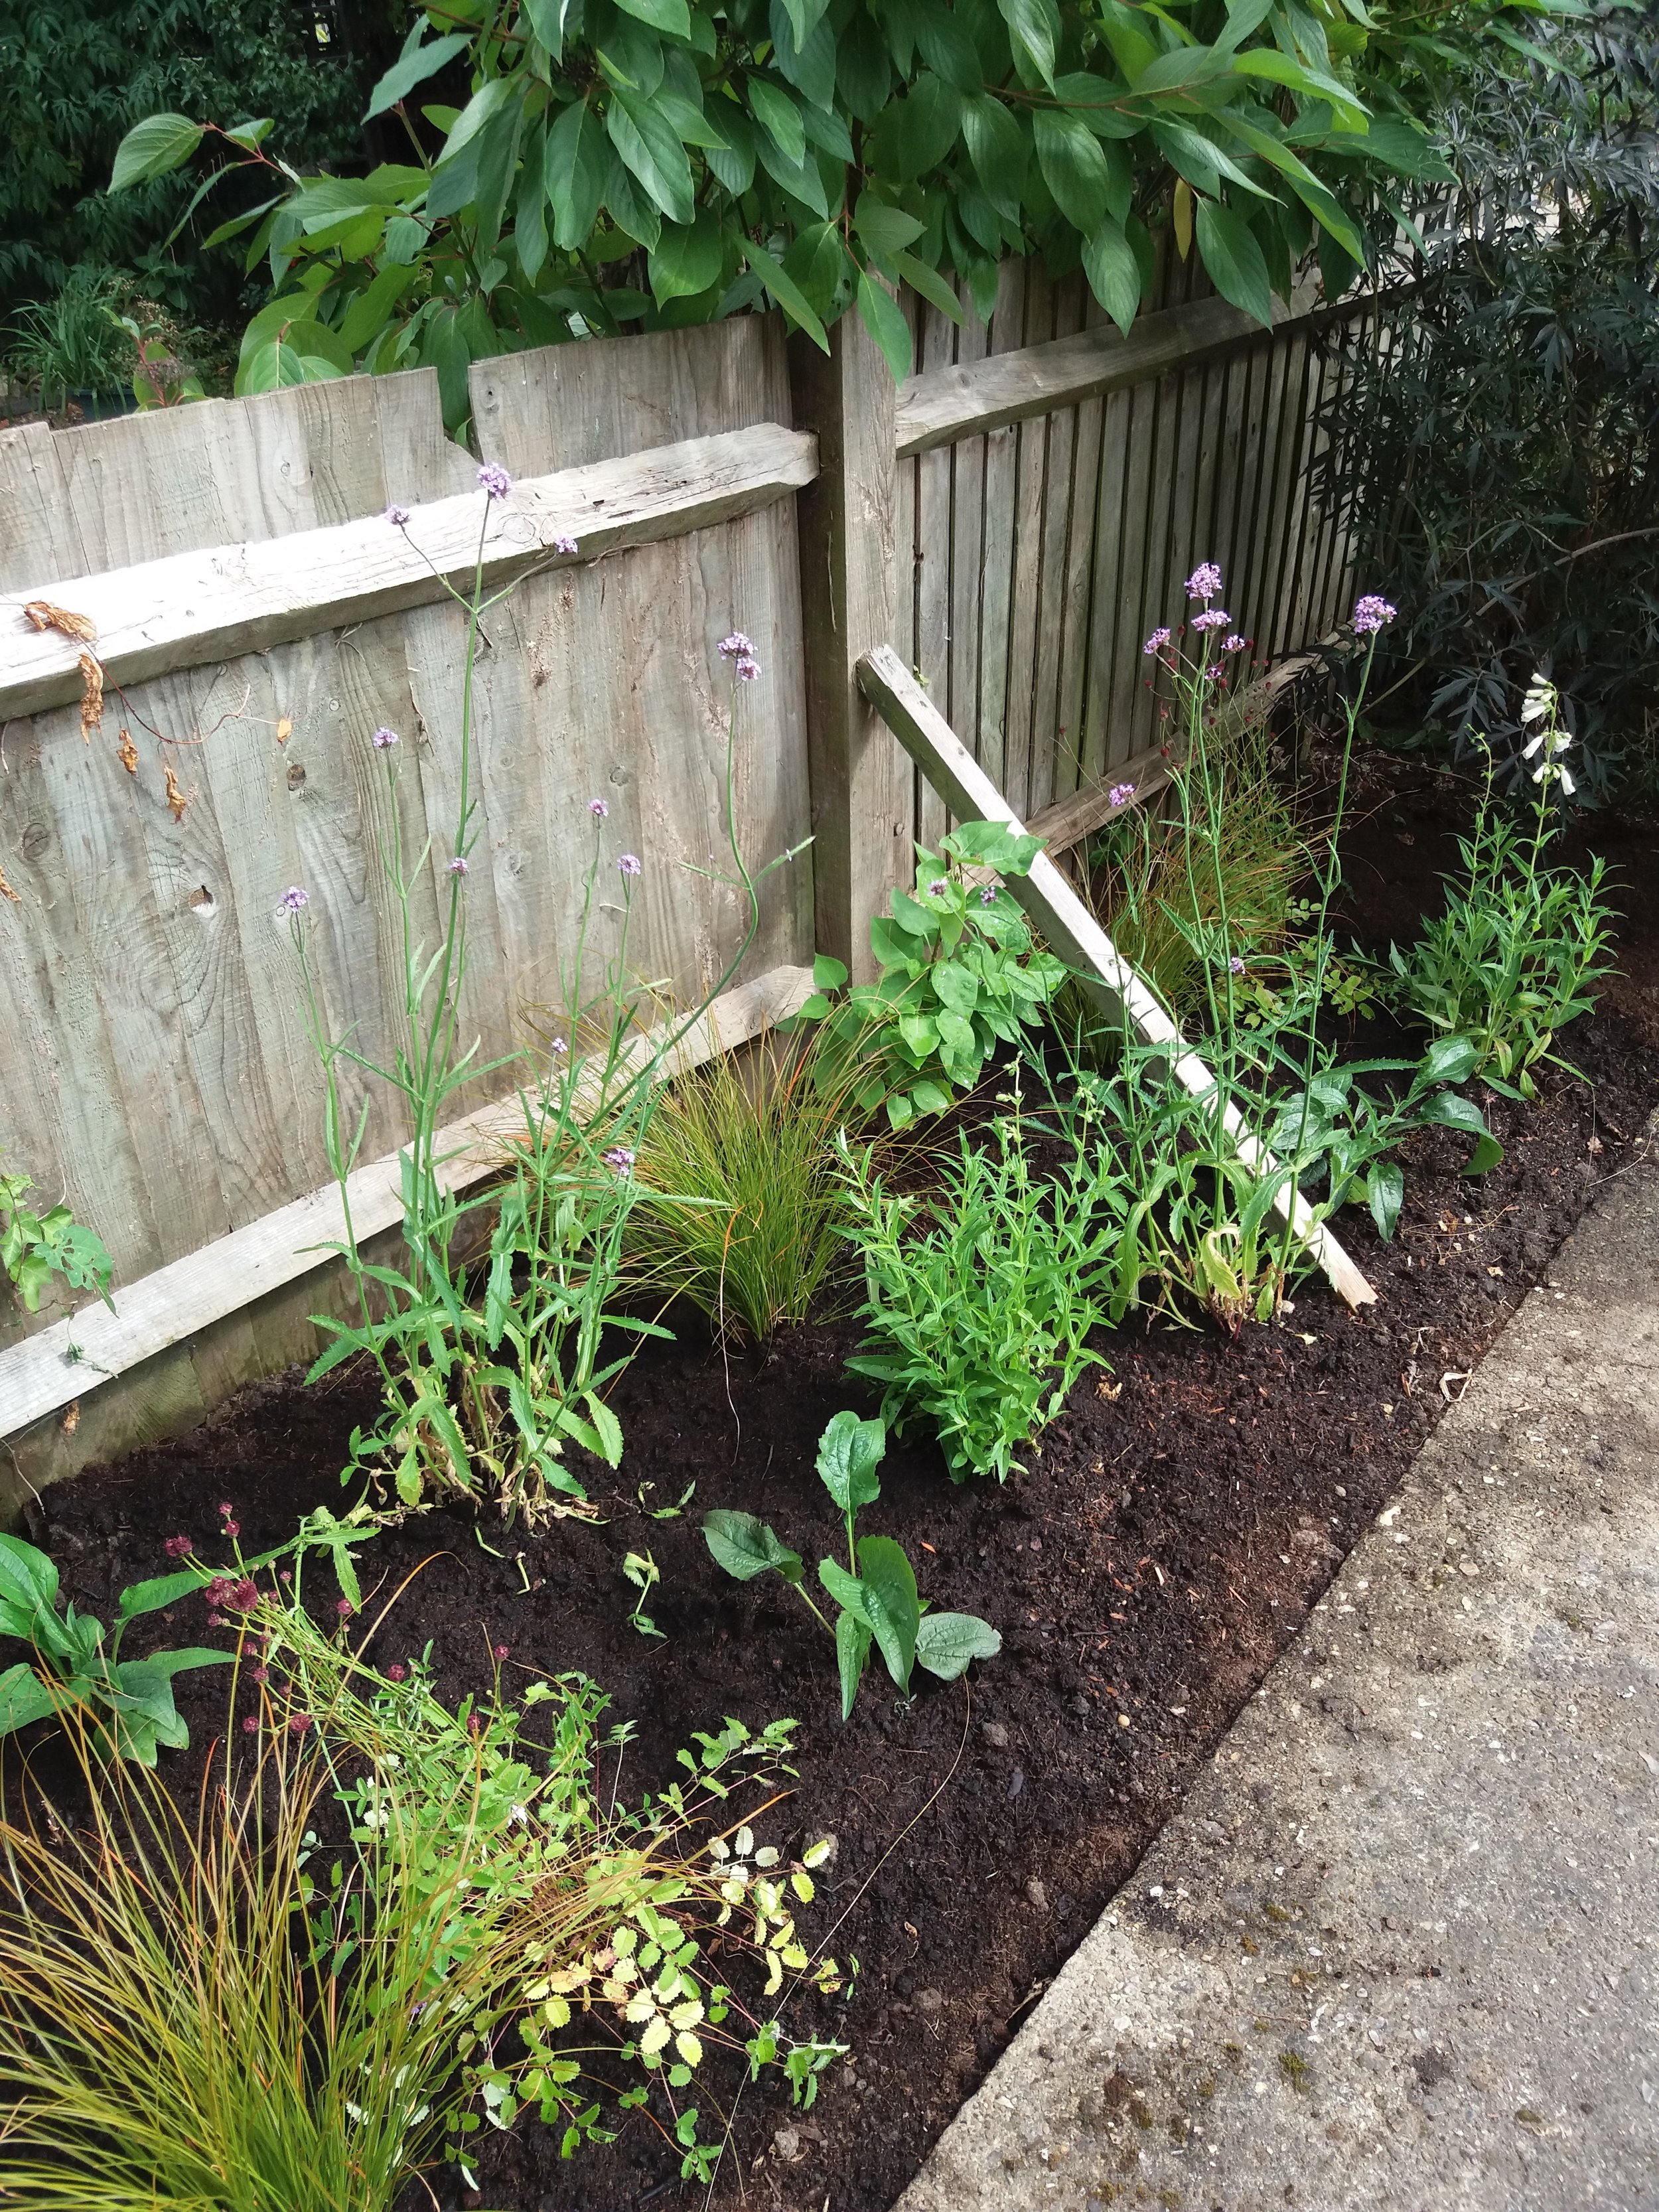 Planting up  a garden in a cottage garden style using Verbena, Echianacea, Penstemon and many more plants, July 2018